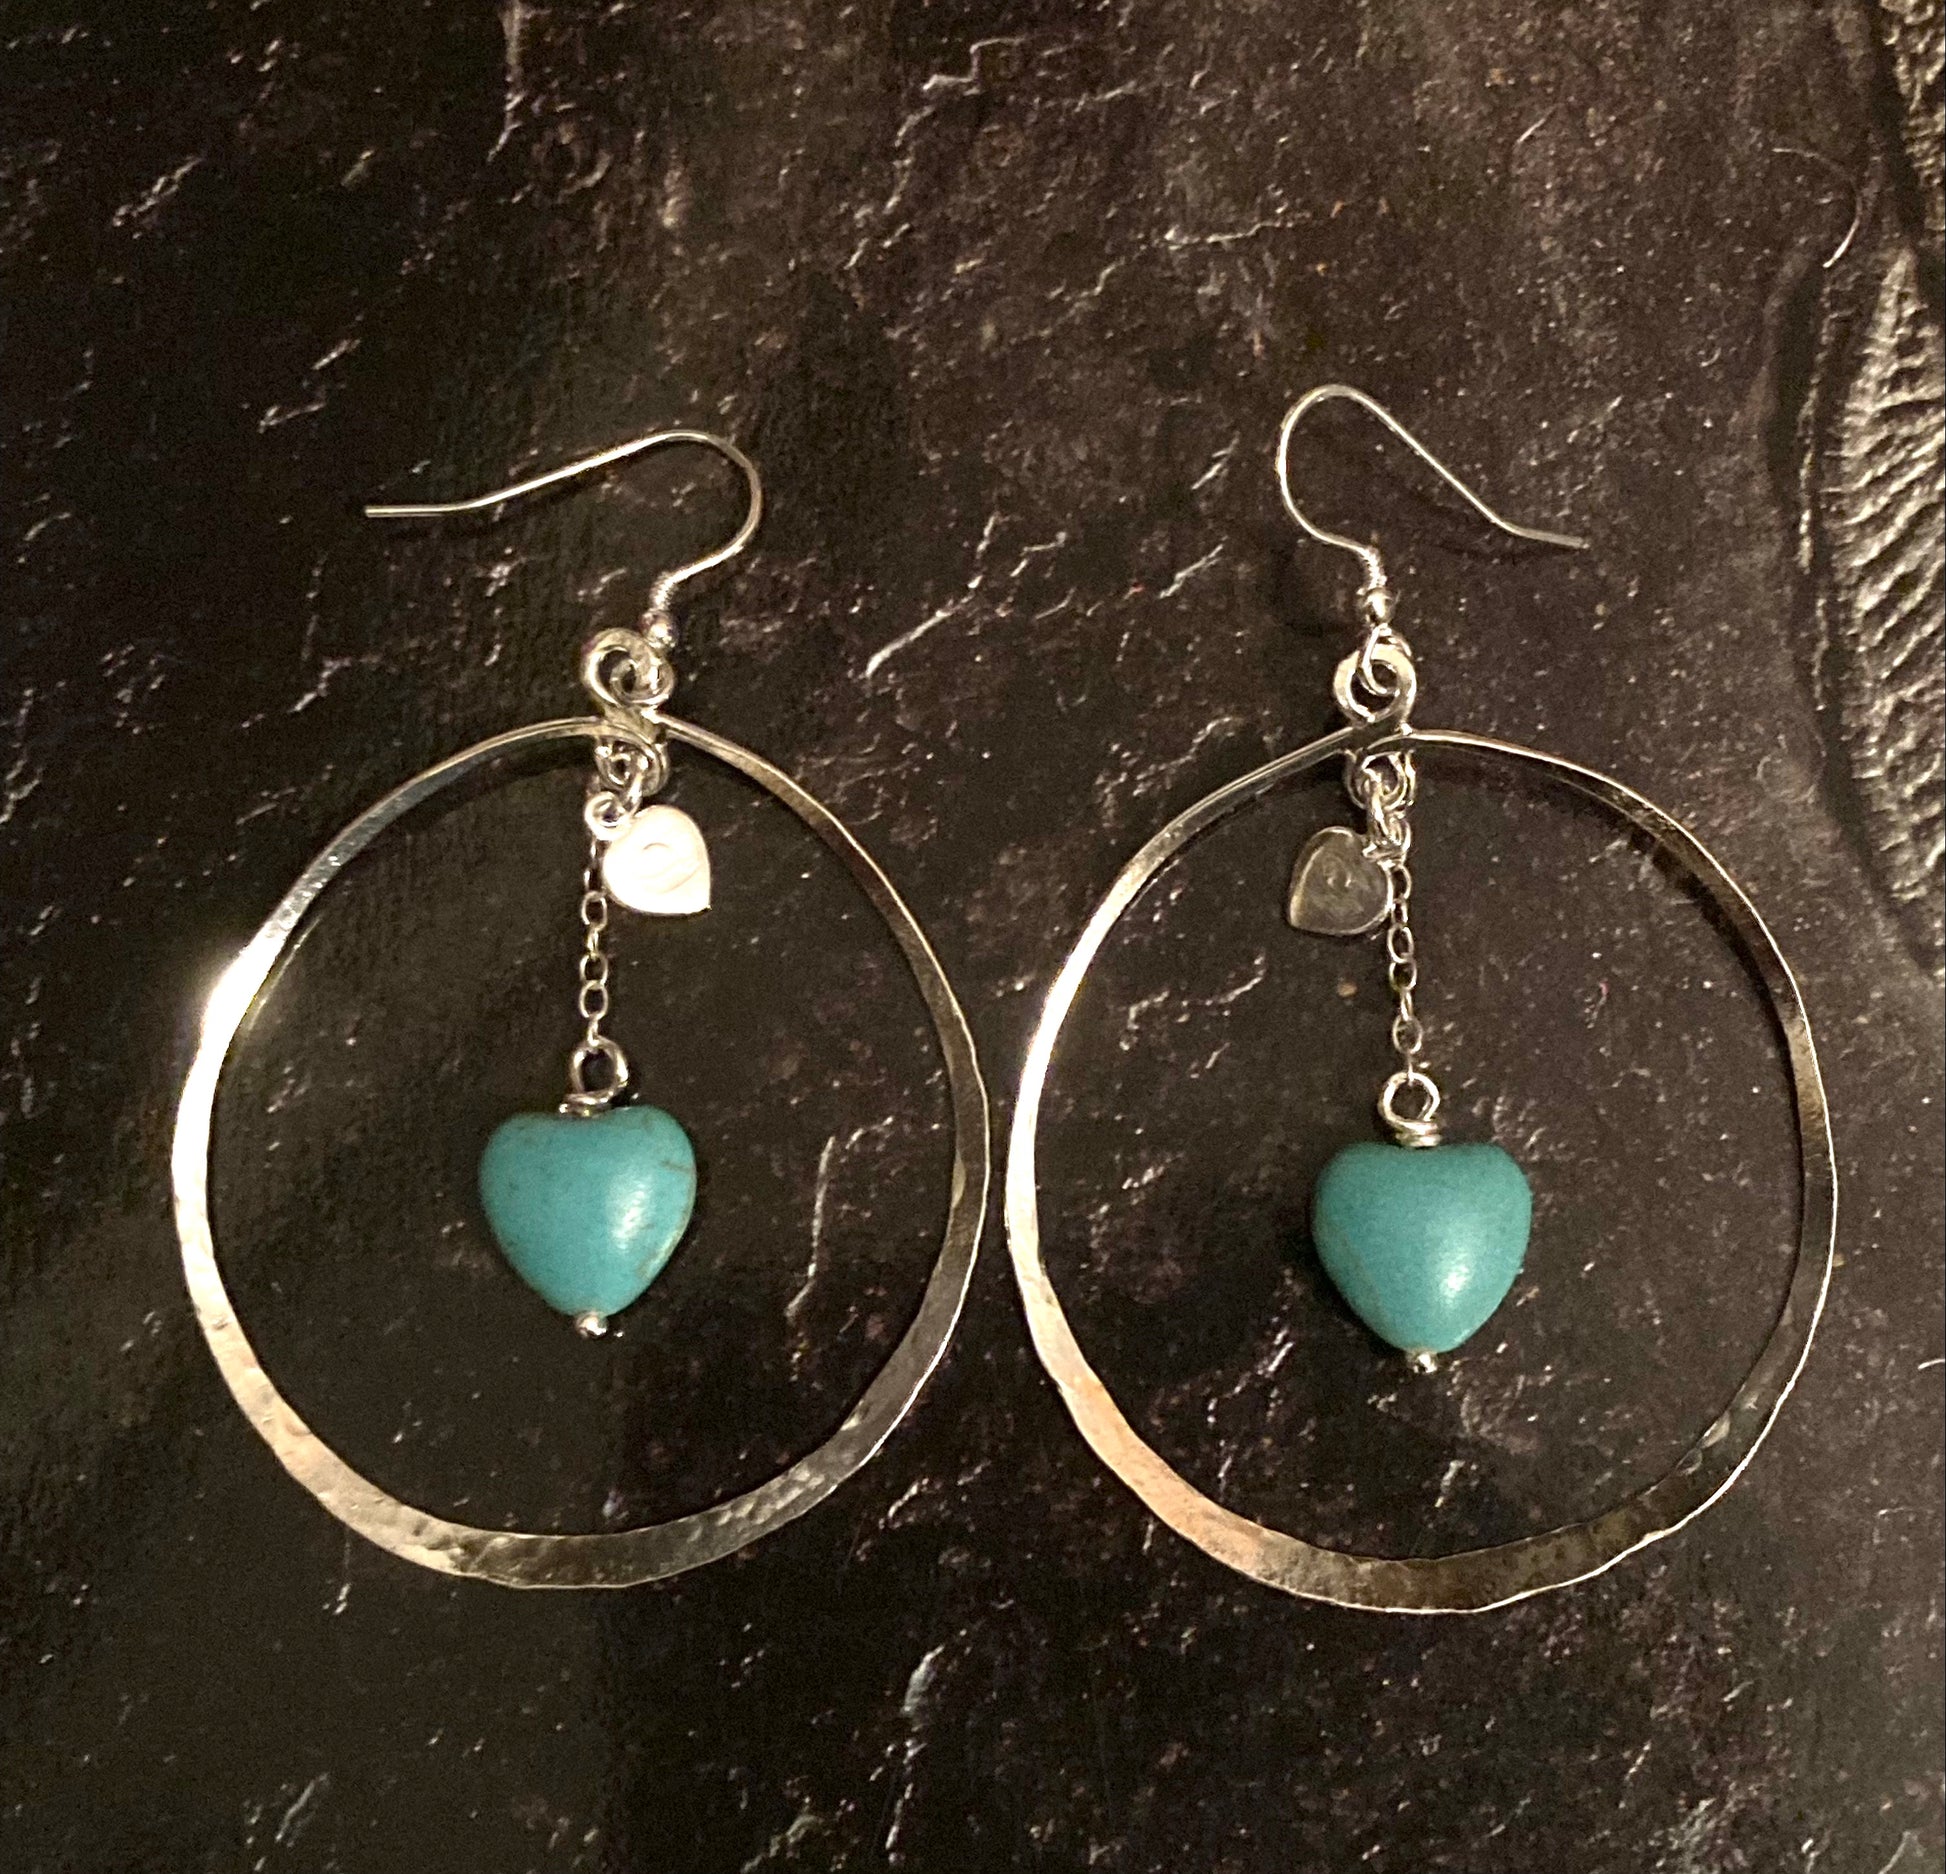 Silver hoop earrings with turquoise